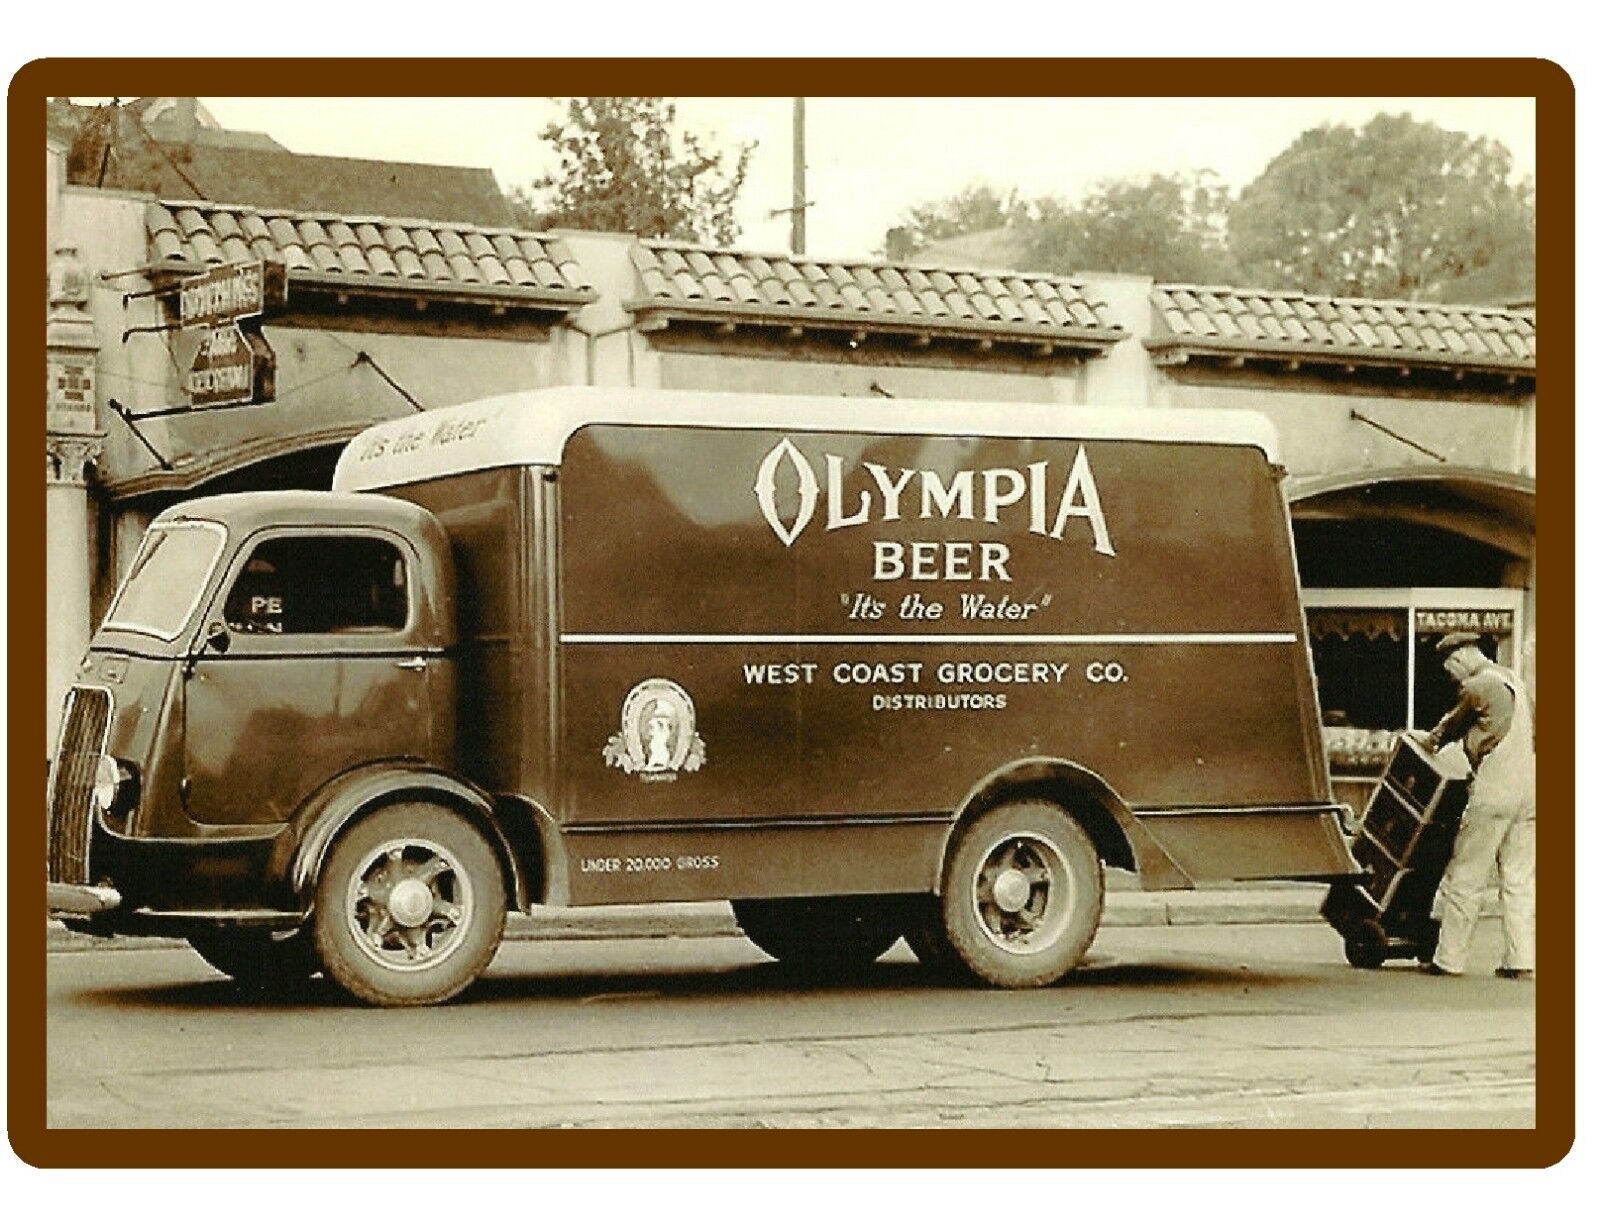 Vintage Olympia Beer Truck  Refrigerator / Tool Box Magnet Man Cave